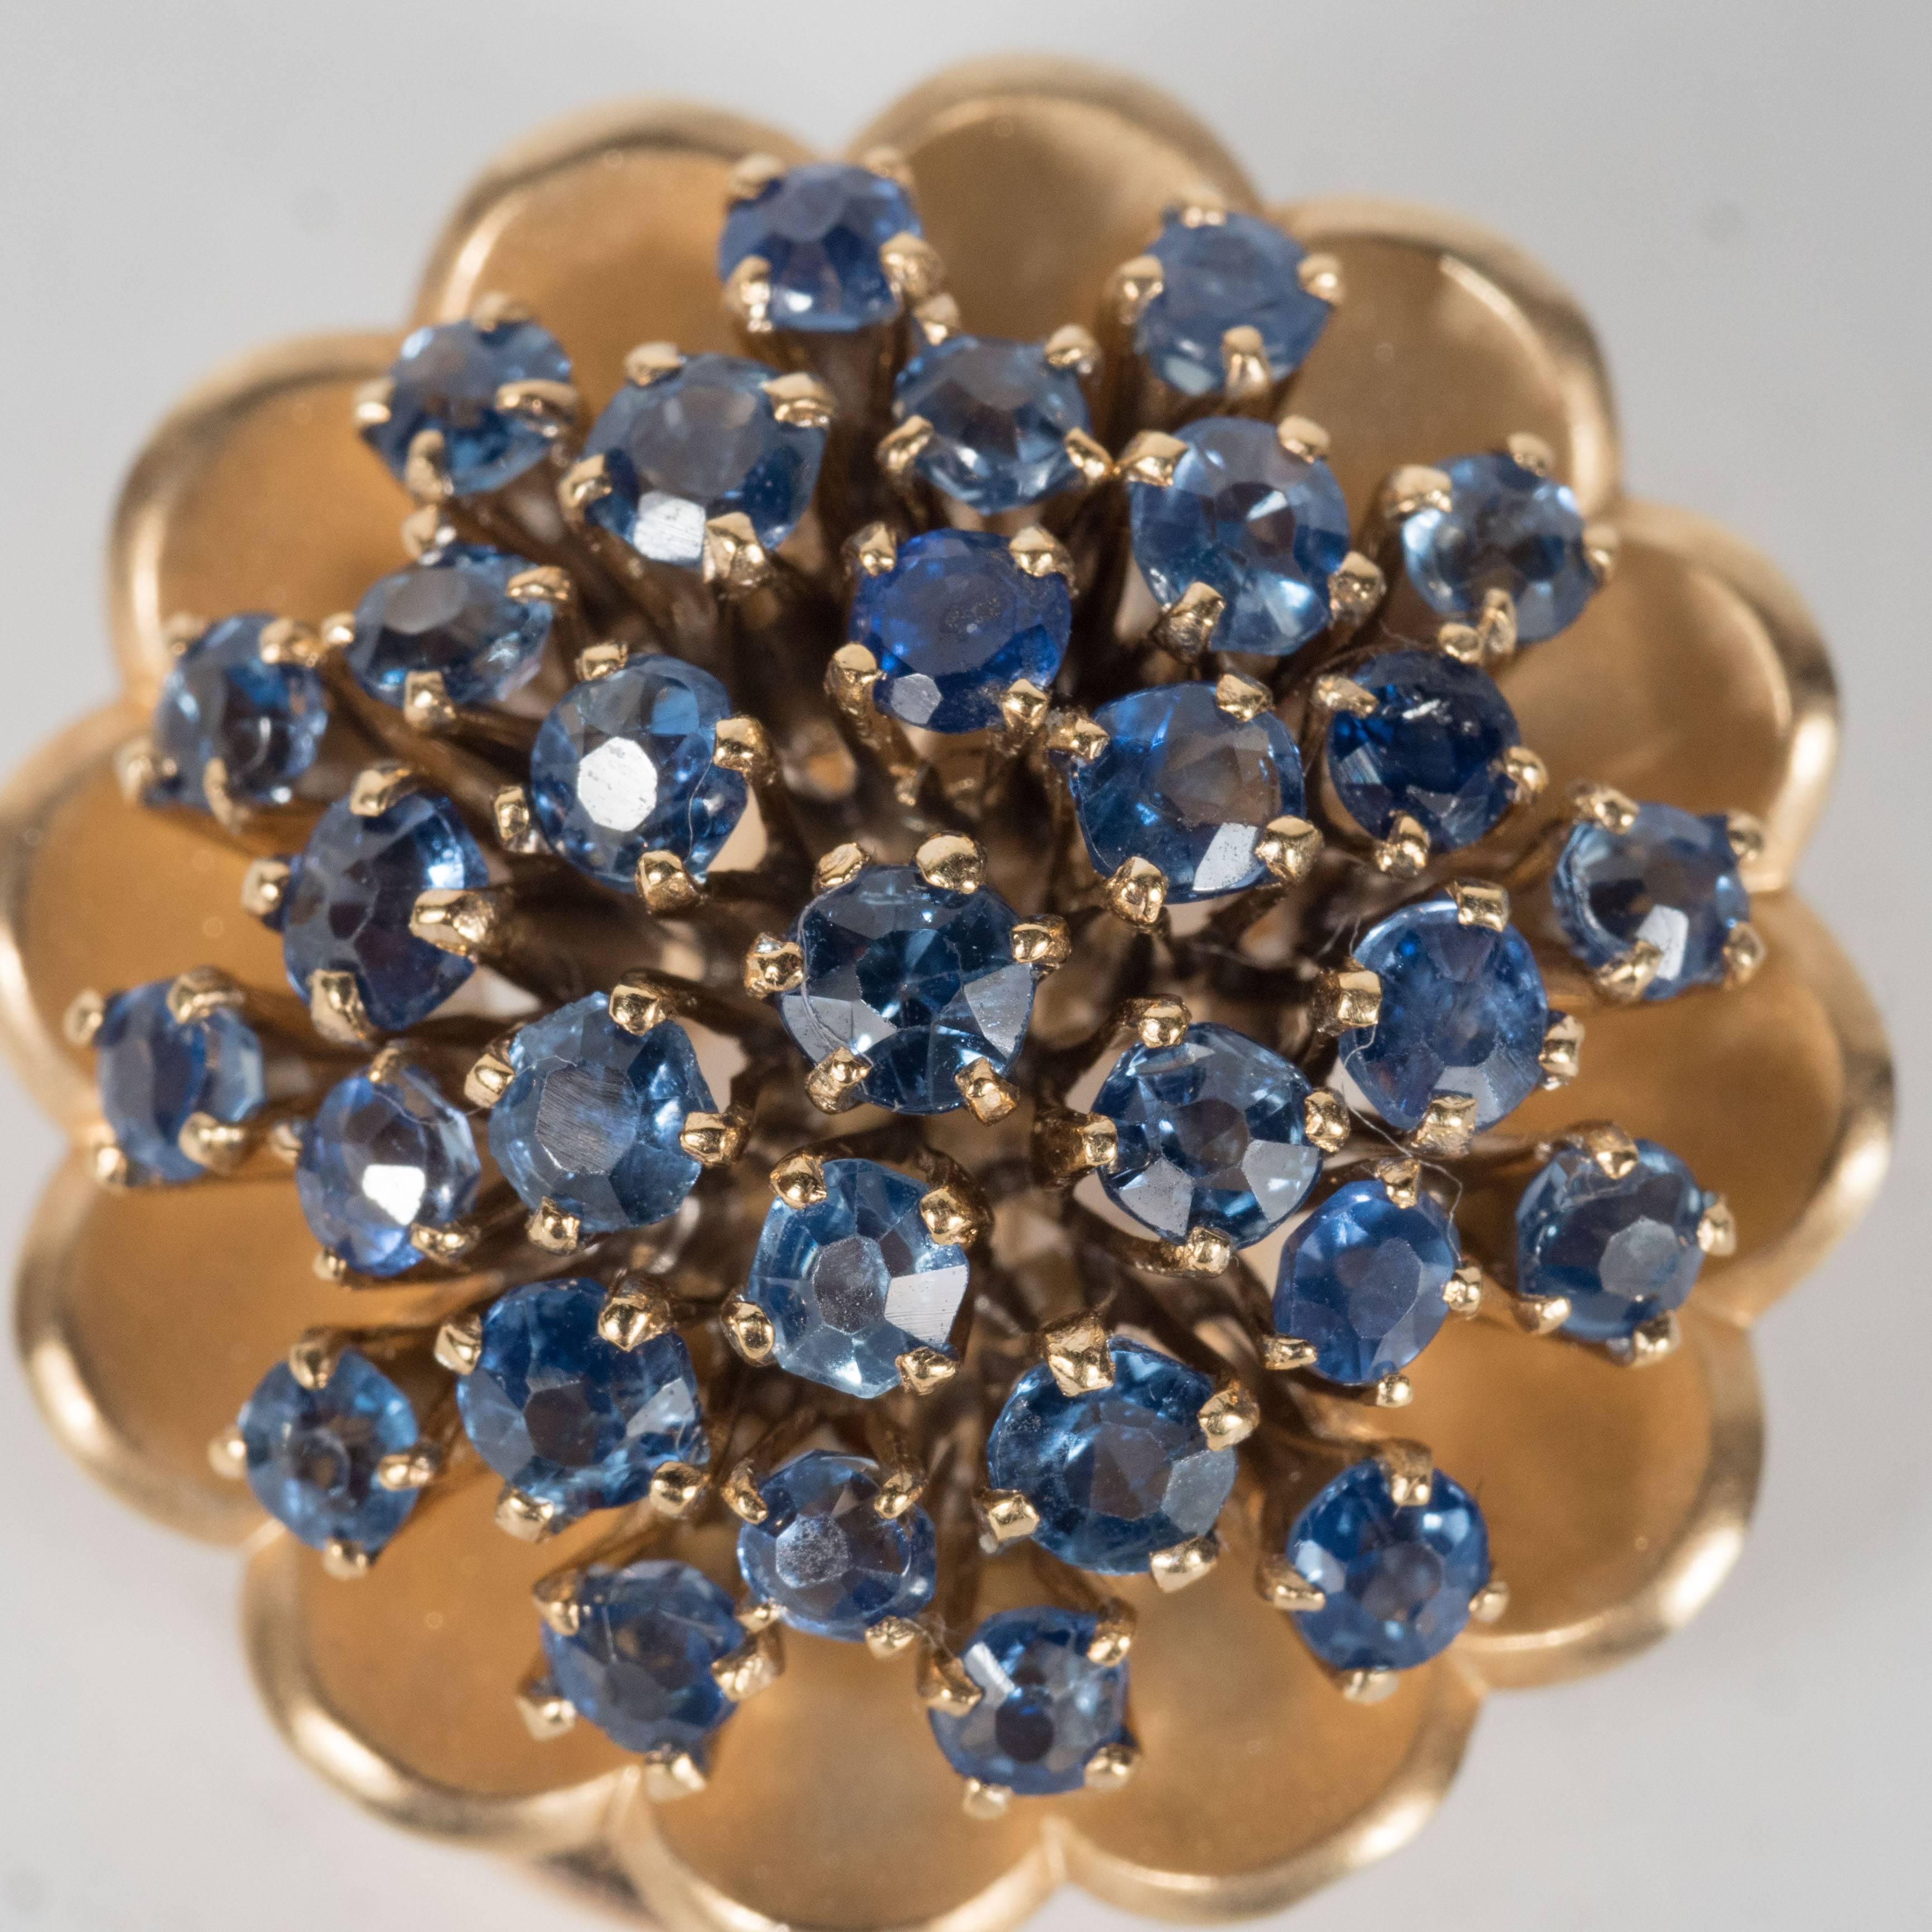 These Mid-Century modernist pair of 18k yellow gold and sapphire ear clips are made in Austria and were purchased in 1968.They are designed as a cluster of numerous round sapphires set in a 18k yellow gold stylized floral back.These  ear clips have